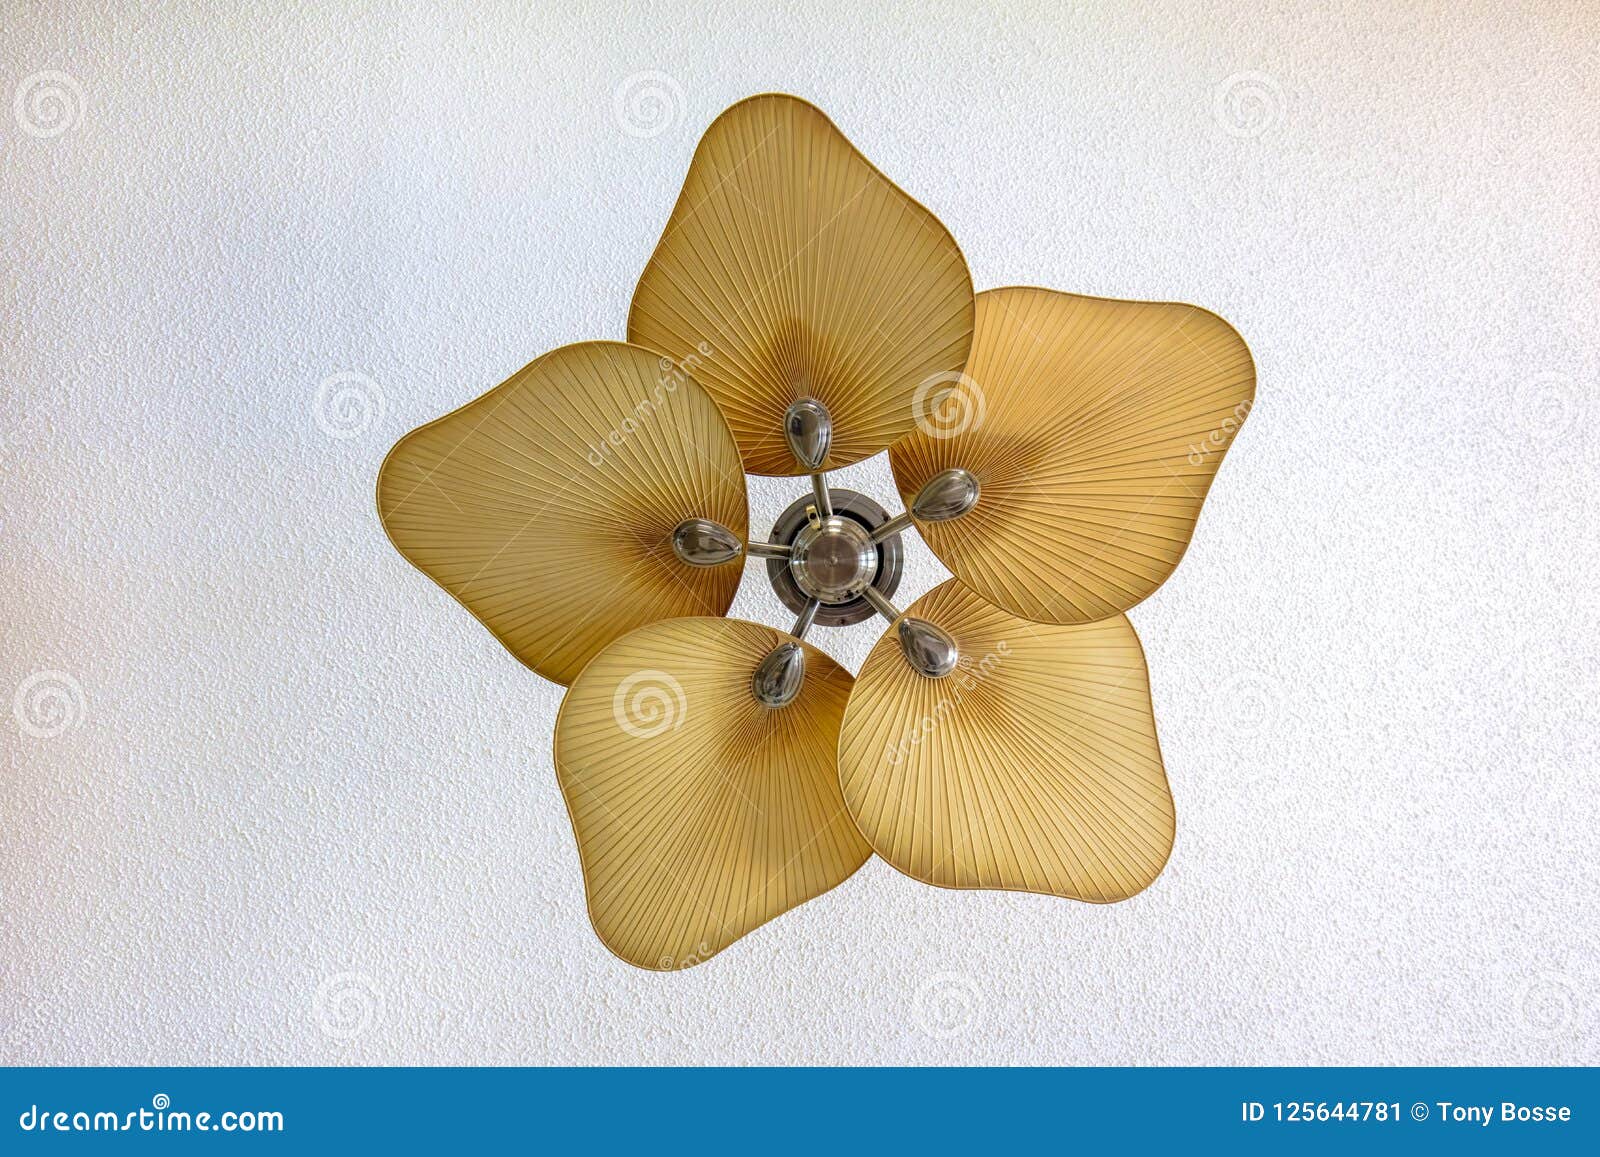 Ceiling Fan With Leaf Shaped Blades Stock Image Image Of